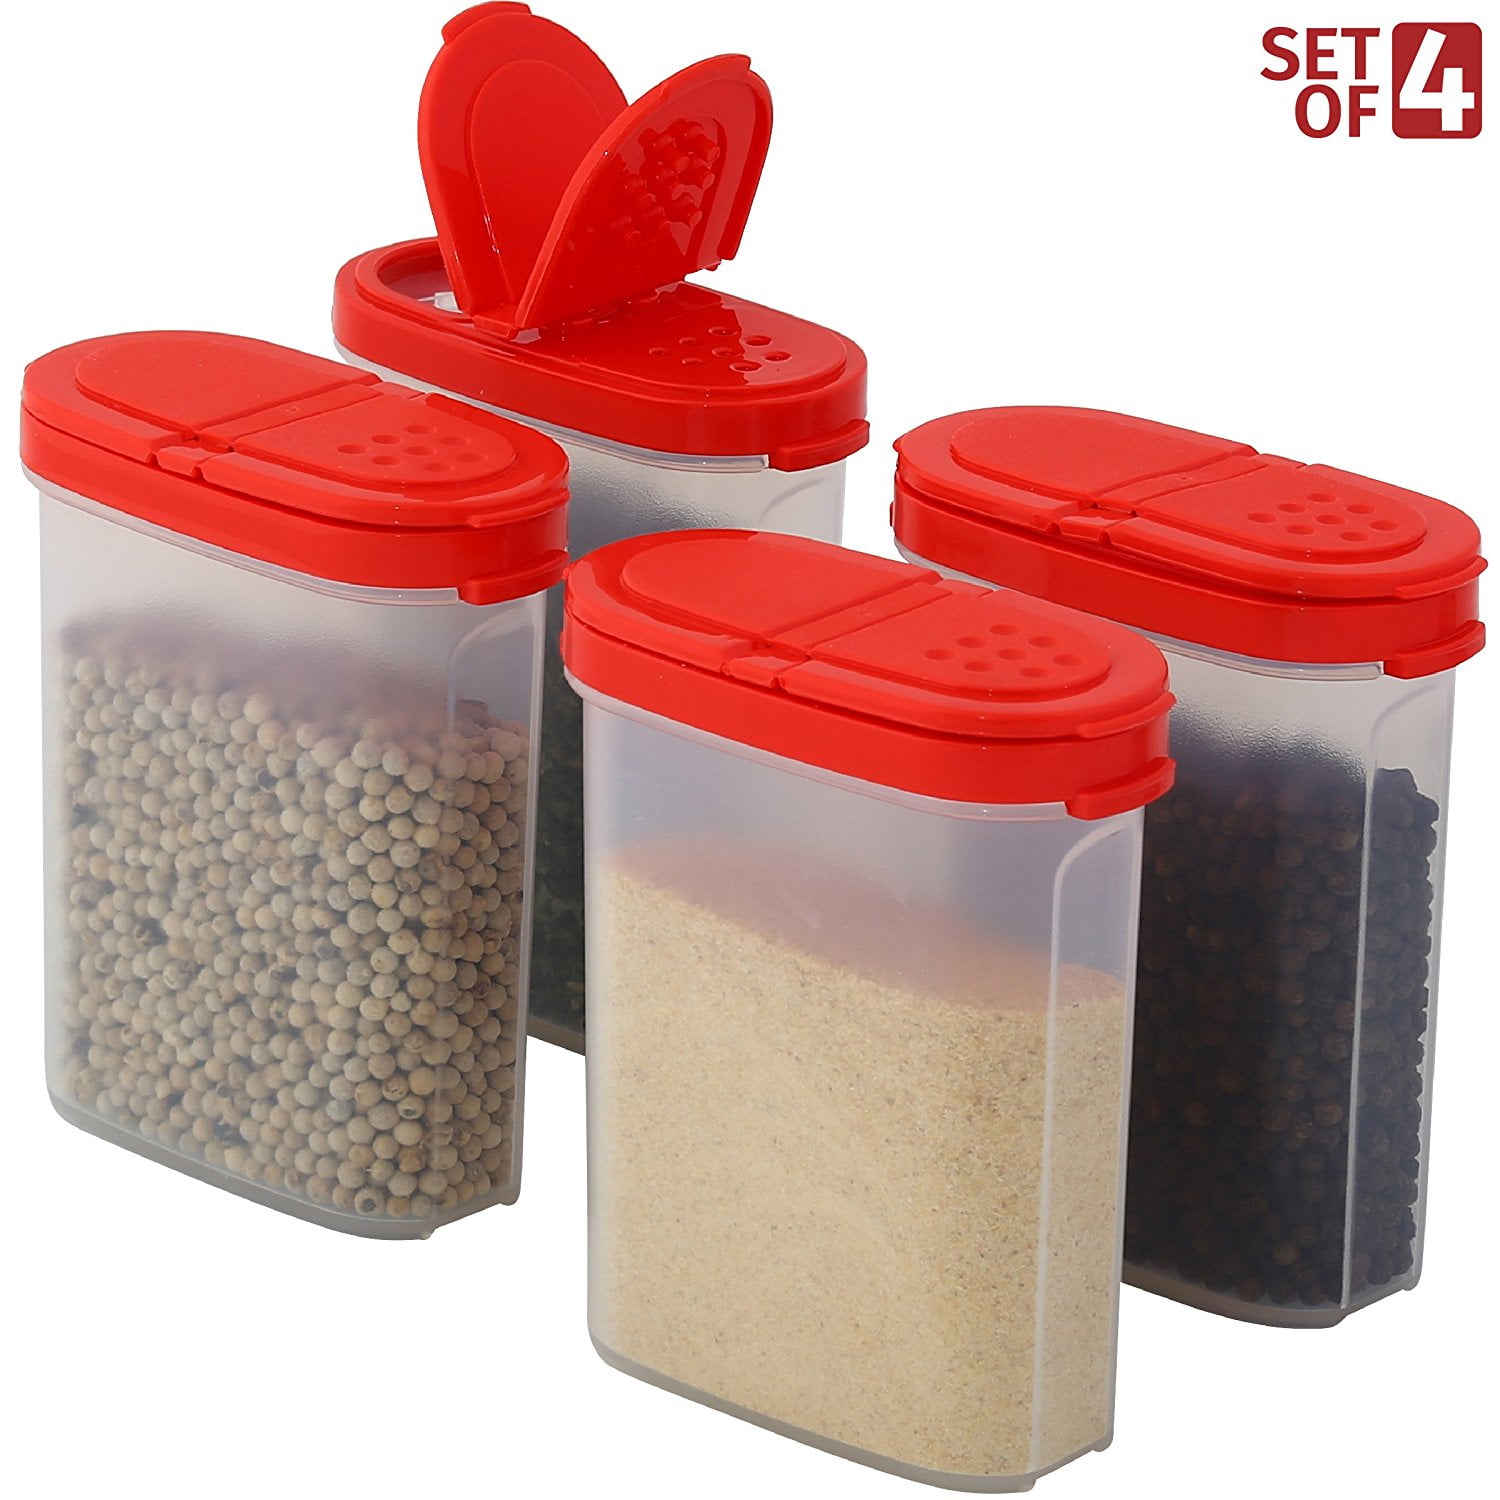 Hacaroa 16 Pack 21 Oz Plastic Spice Jars with Shaker/Pourer Lids, Square  Empty Seasoning Containers Clear Spice Bottles for Dry Food, Condiments